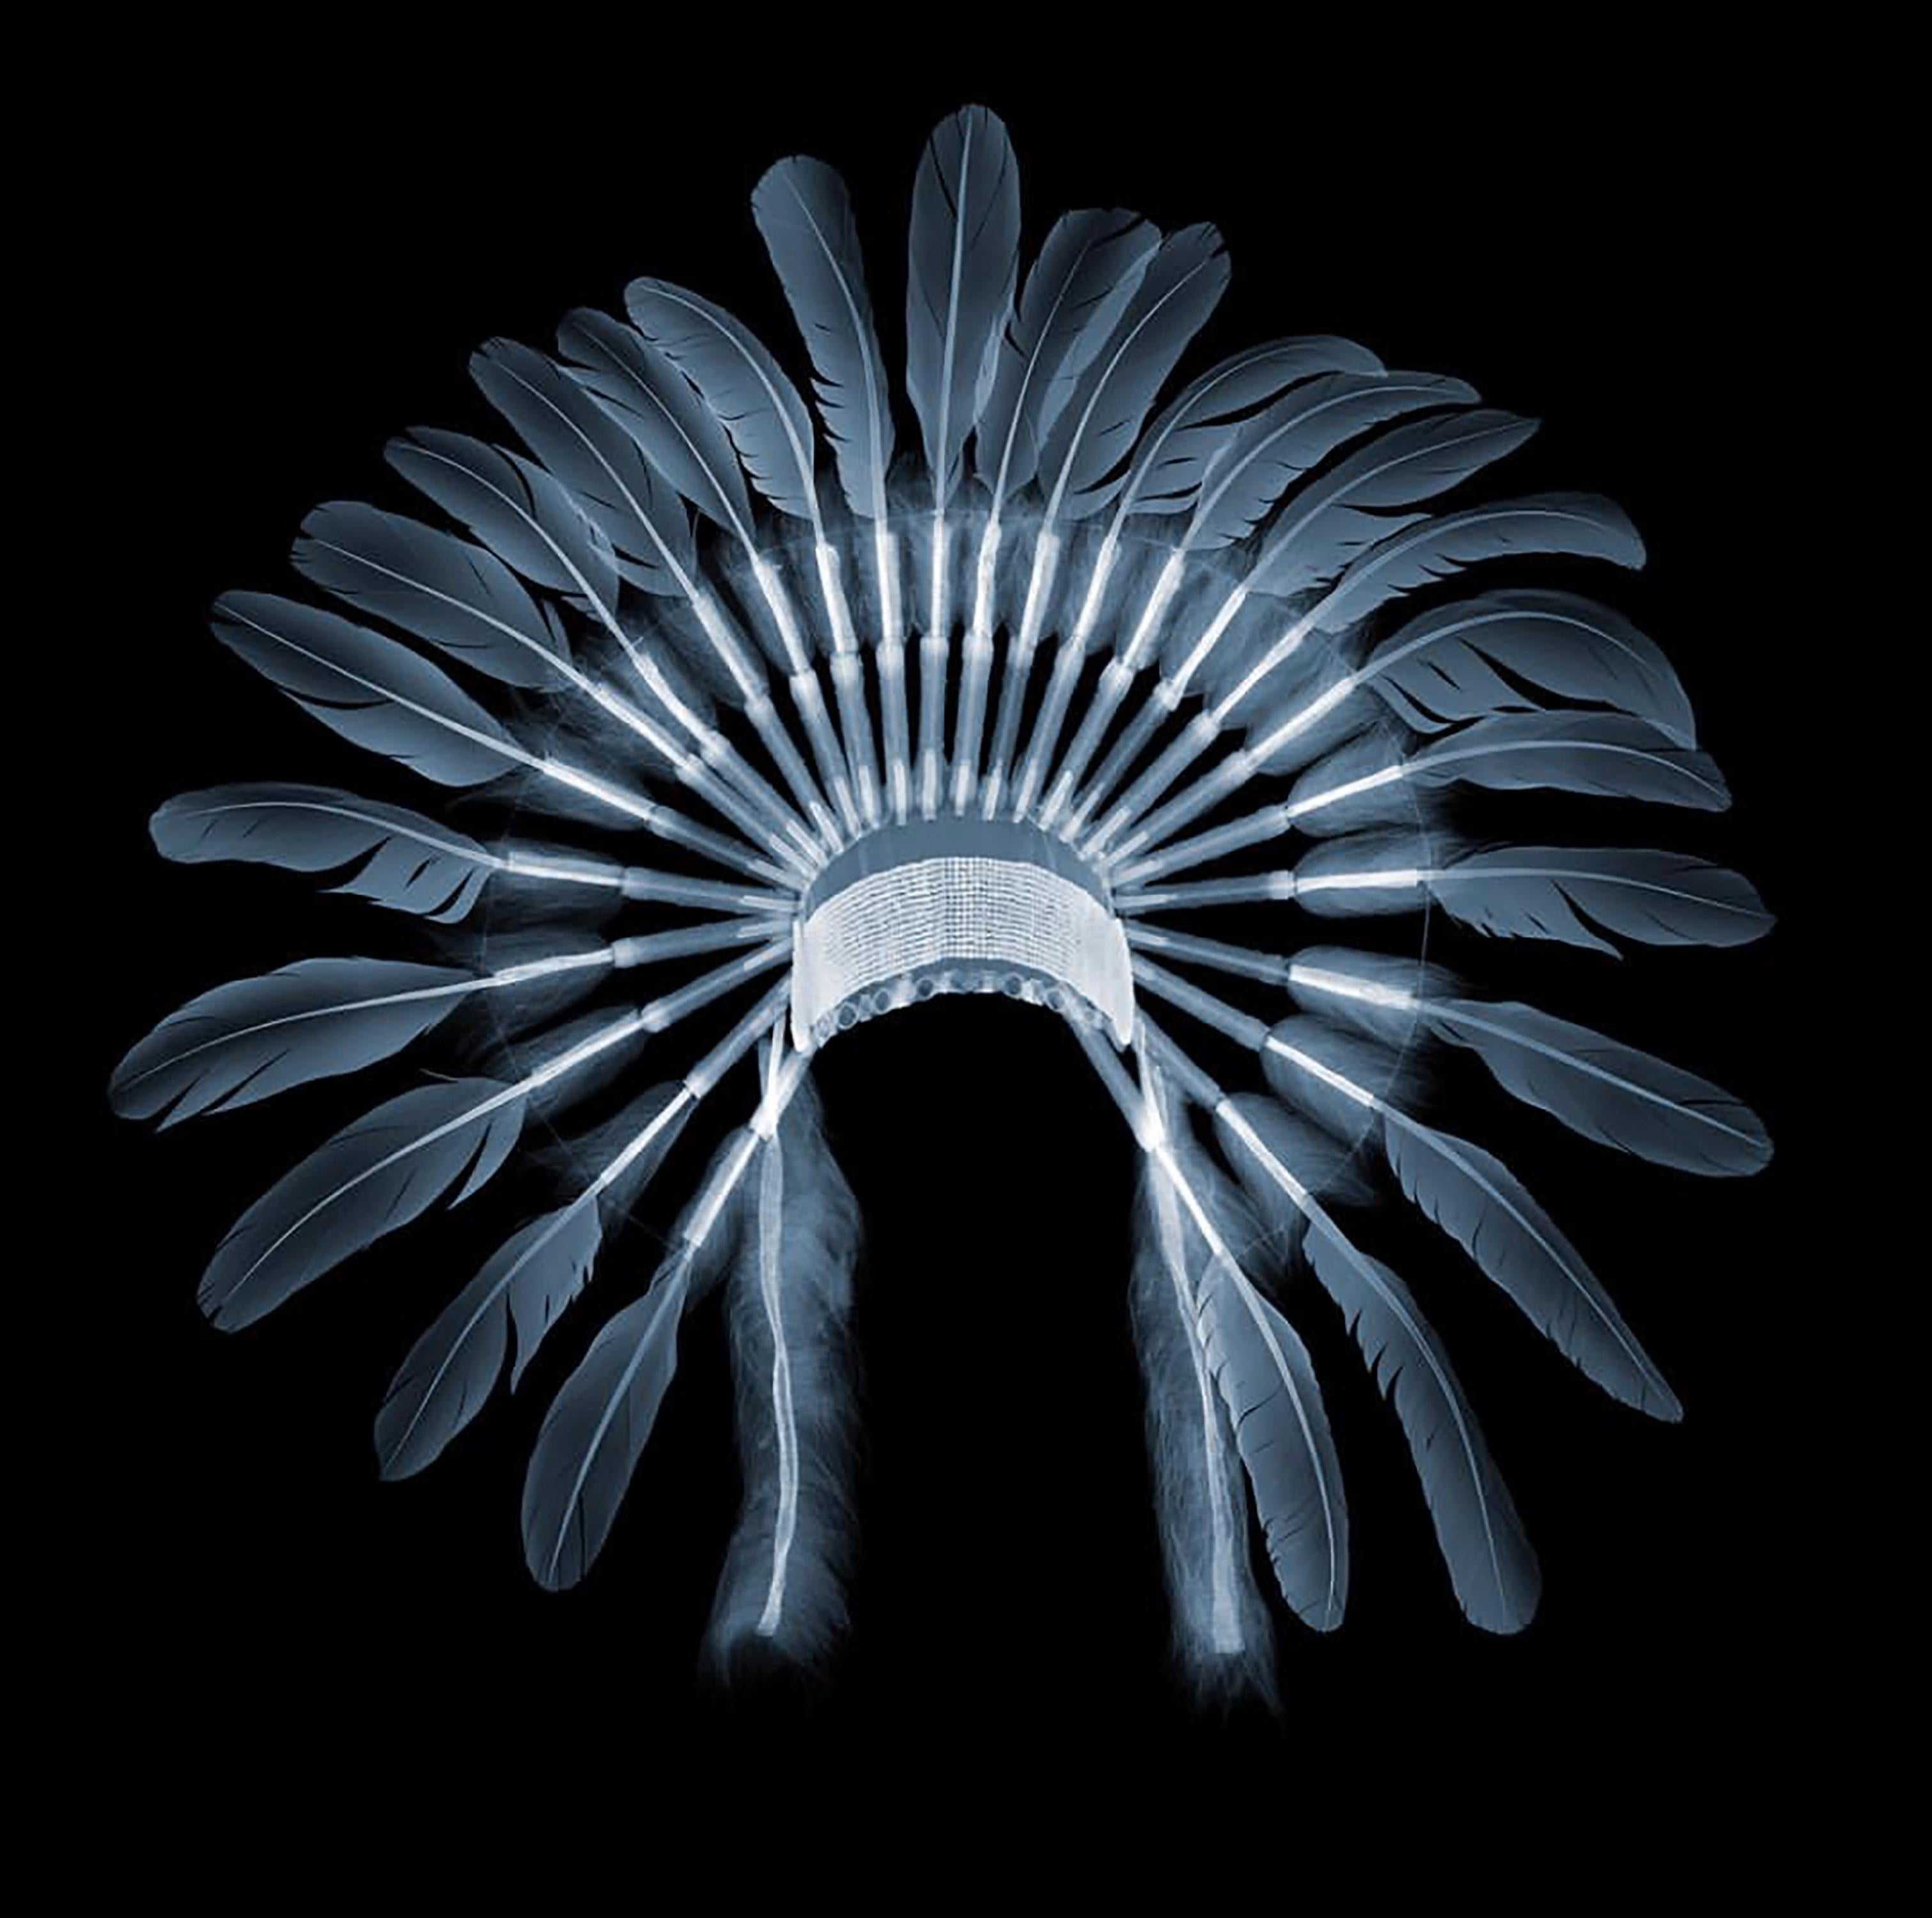 Headdress
47x47 inches 
X-Ray C-Type print with Diasec frame 
Limited Edition 4 of 9

X-Ray print of a Native American feathered headdress. Artist Nick Veasey explores the intersection between science and art by creating a unique and detailed work